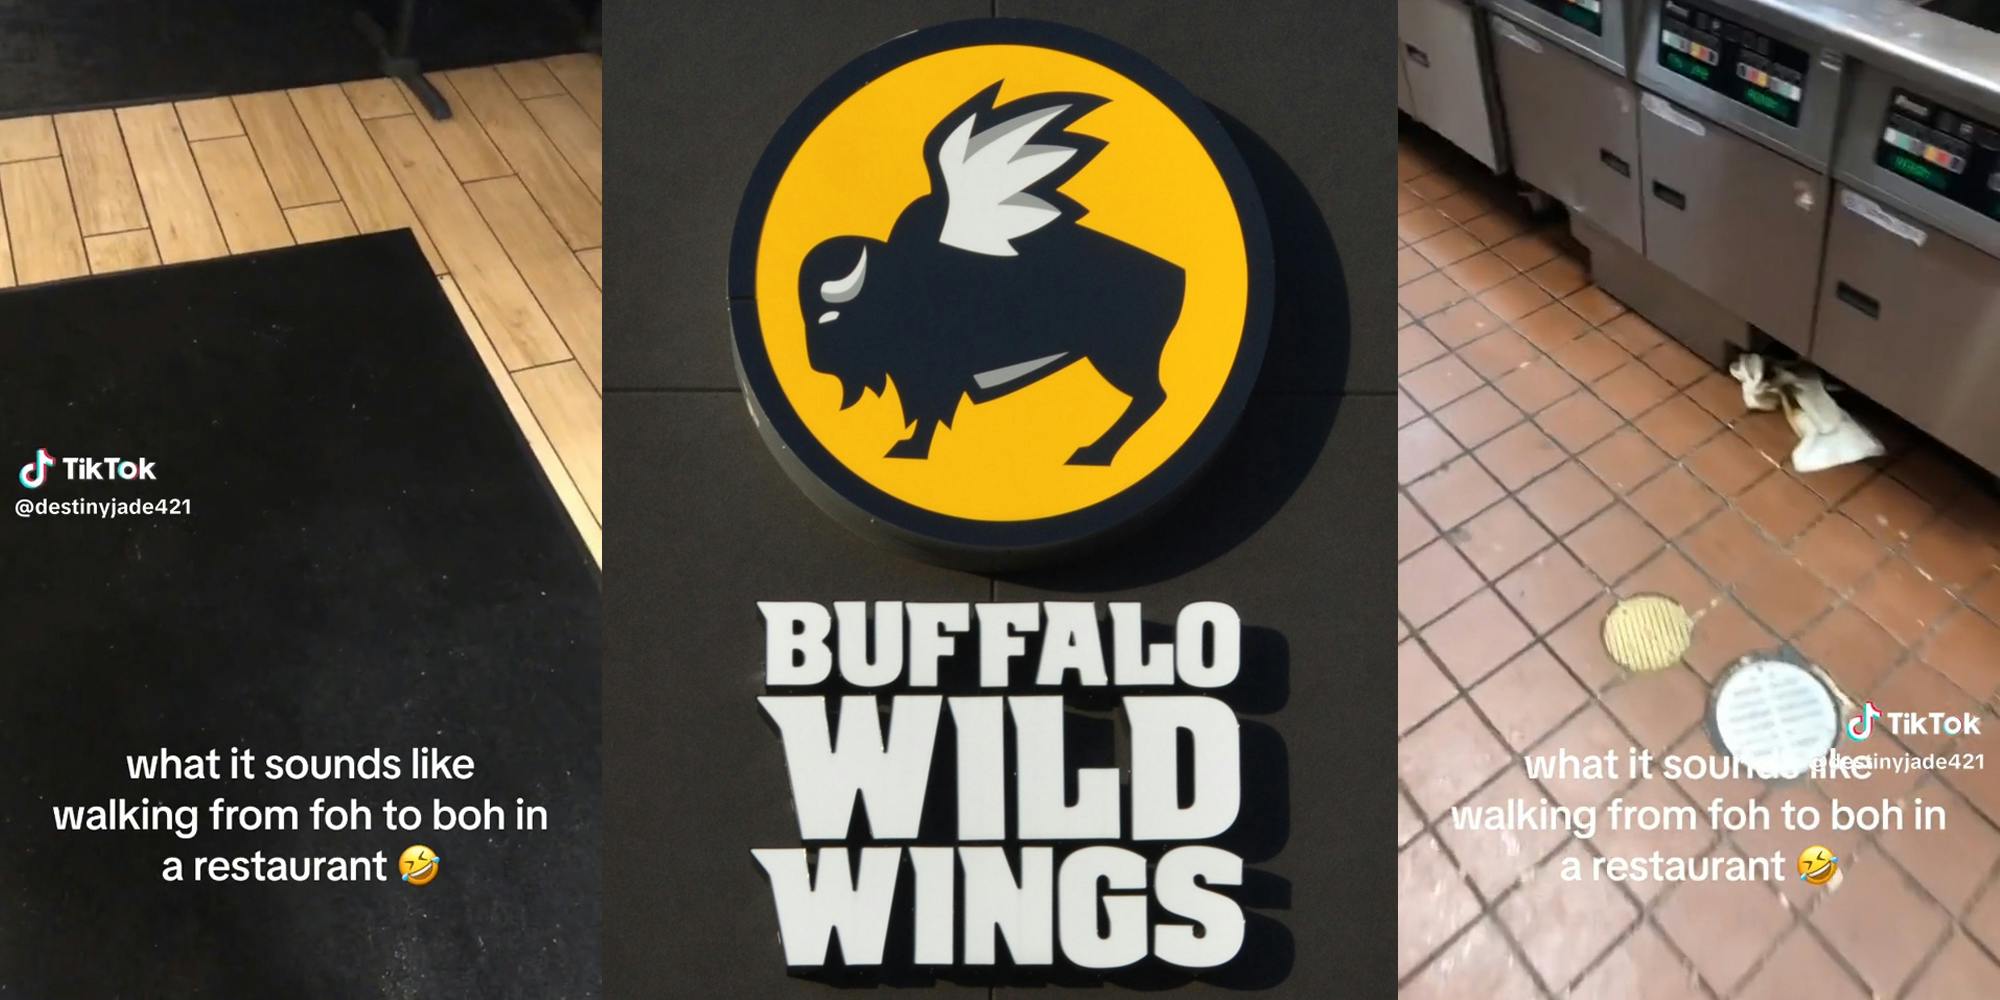 buffalo wild wings interior with caption "what it sounds like walking from foh to boh in a restaurant" (l&r) Buffalo Wild Wings sign (c)